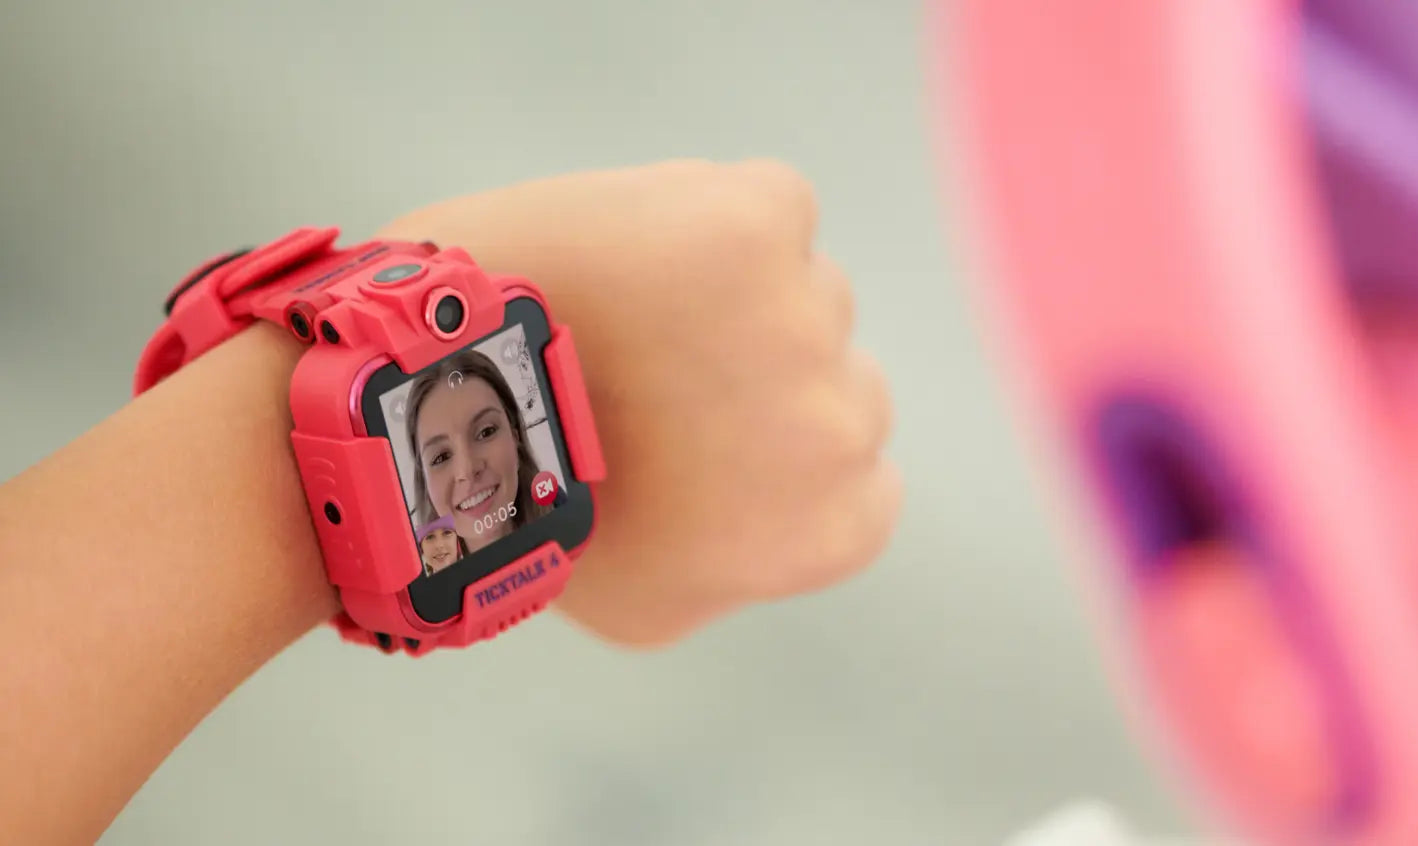 TickTalk Make Voice And Video Watch Calls From Your Smartwatch